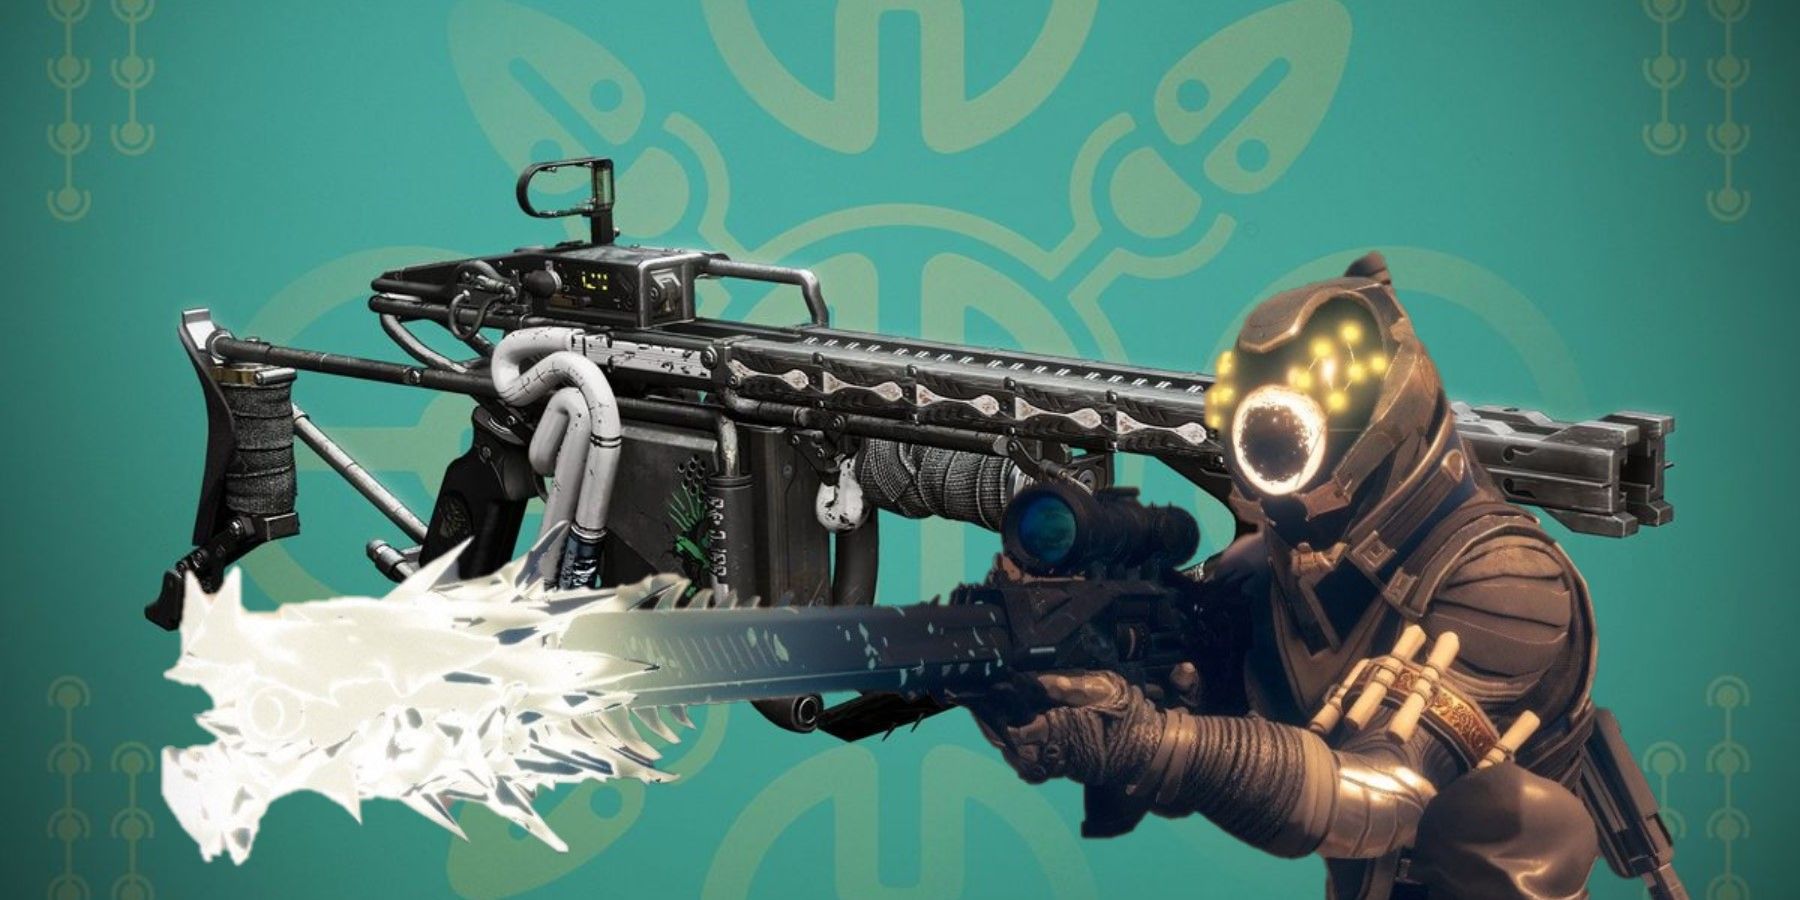 destiny 2 twab weapon exotic buff whisper of the worm arbalest full auto retrofit mod 30th anniversary pack december players happy